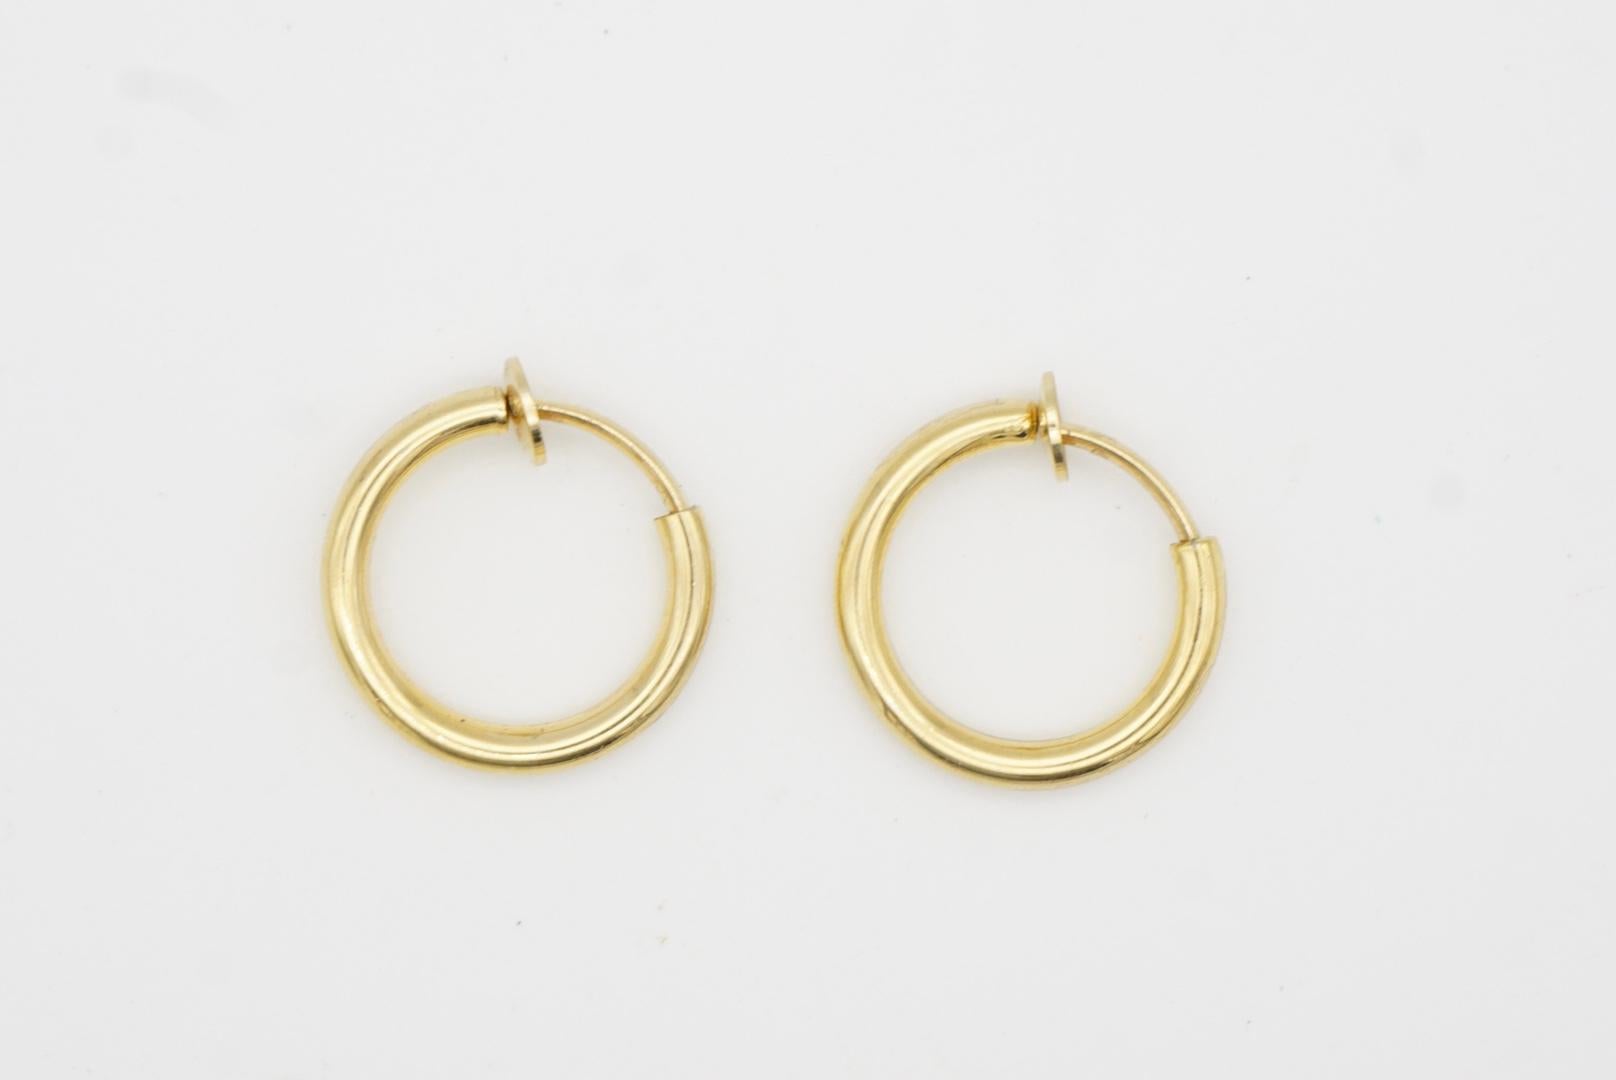 Christian Dior 1980s Vintage Round Circle Glow Hoop Modernist Clip On Earrings For Sale 4